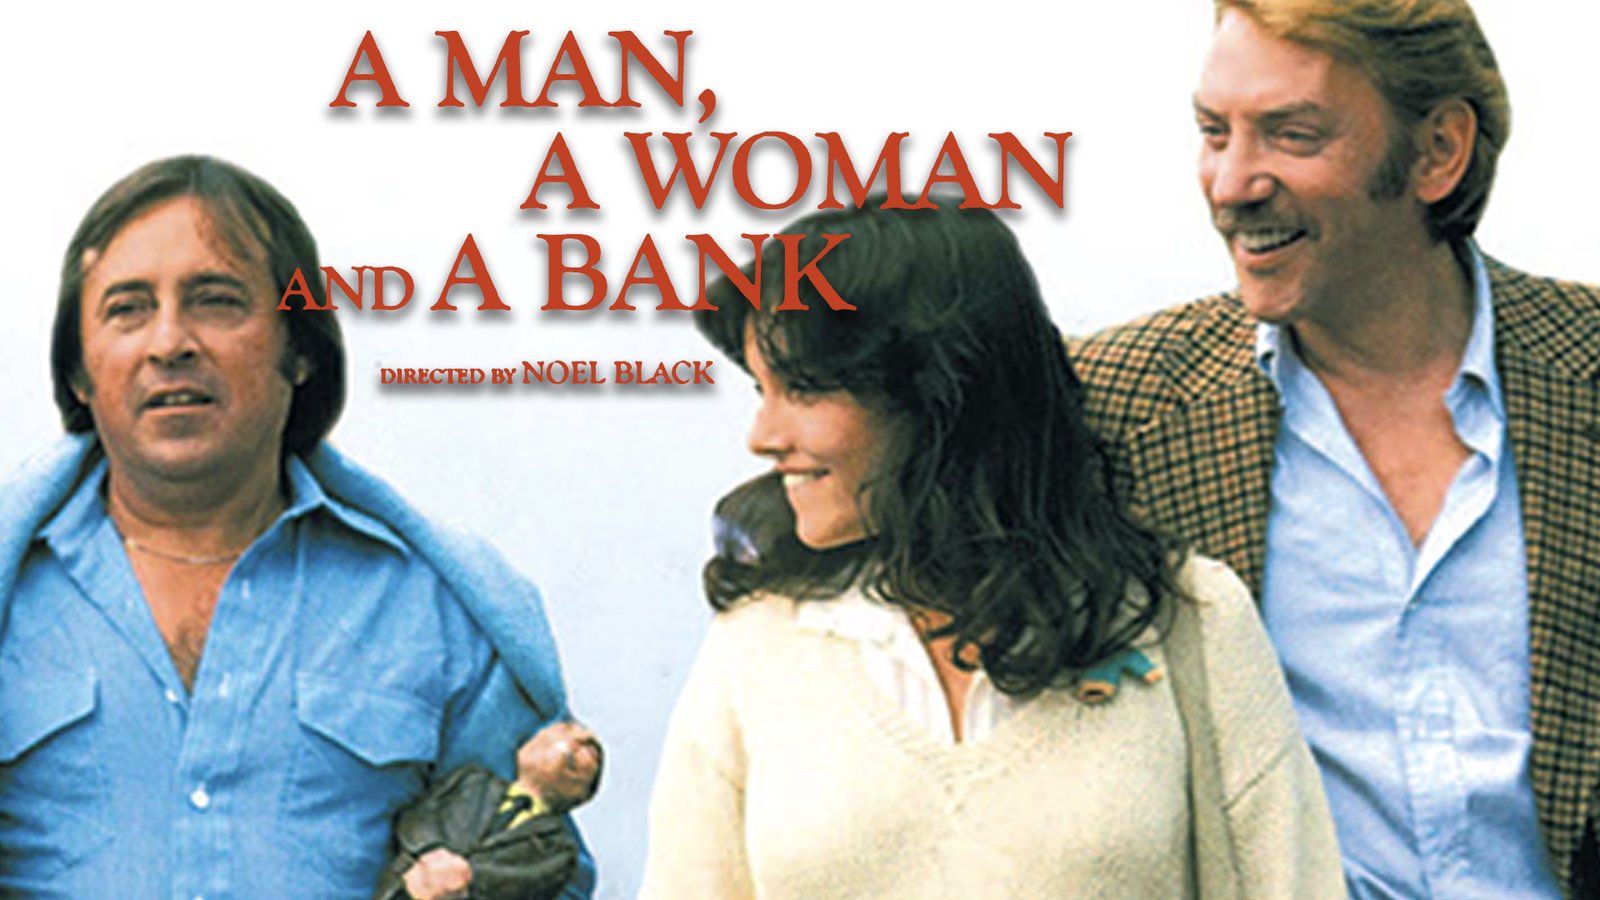 A Man, a Woman, and a Bank